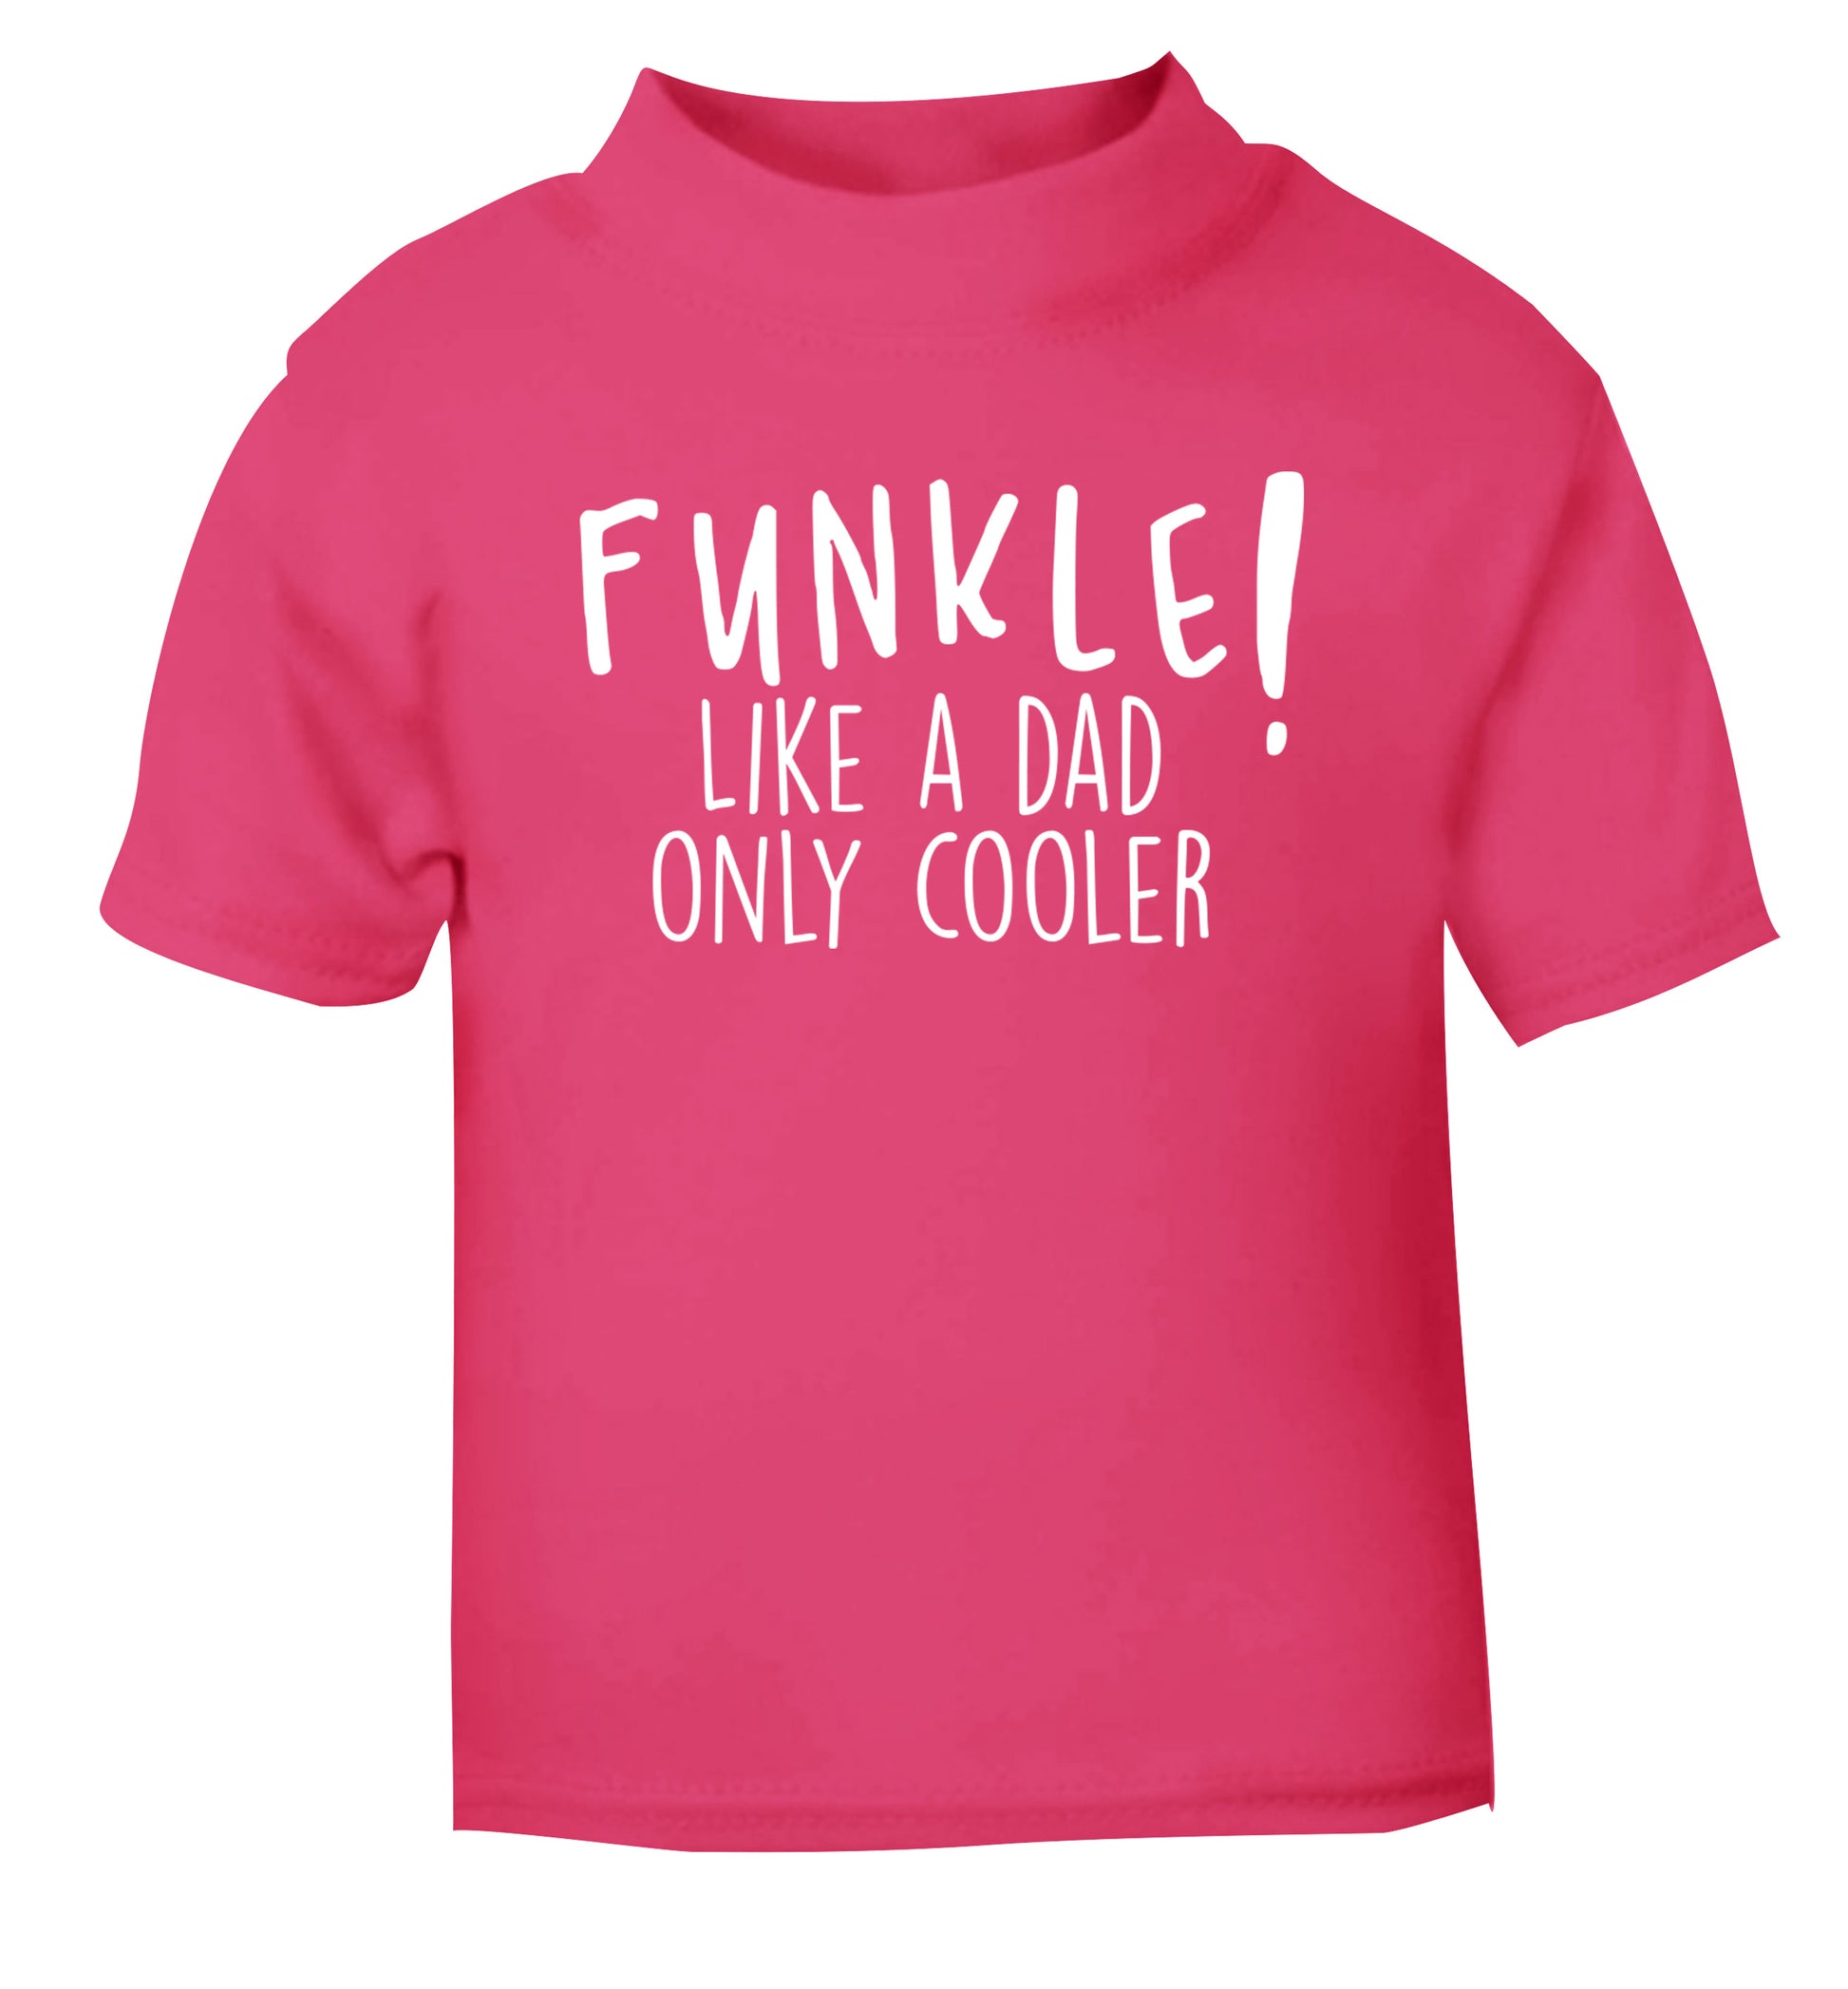 Funkle Like a Dad Only Cooler pink Baby Toddler Tshirt 2 Years